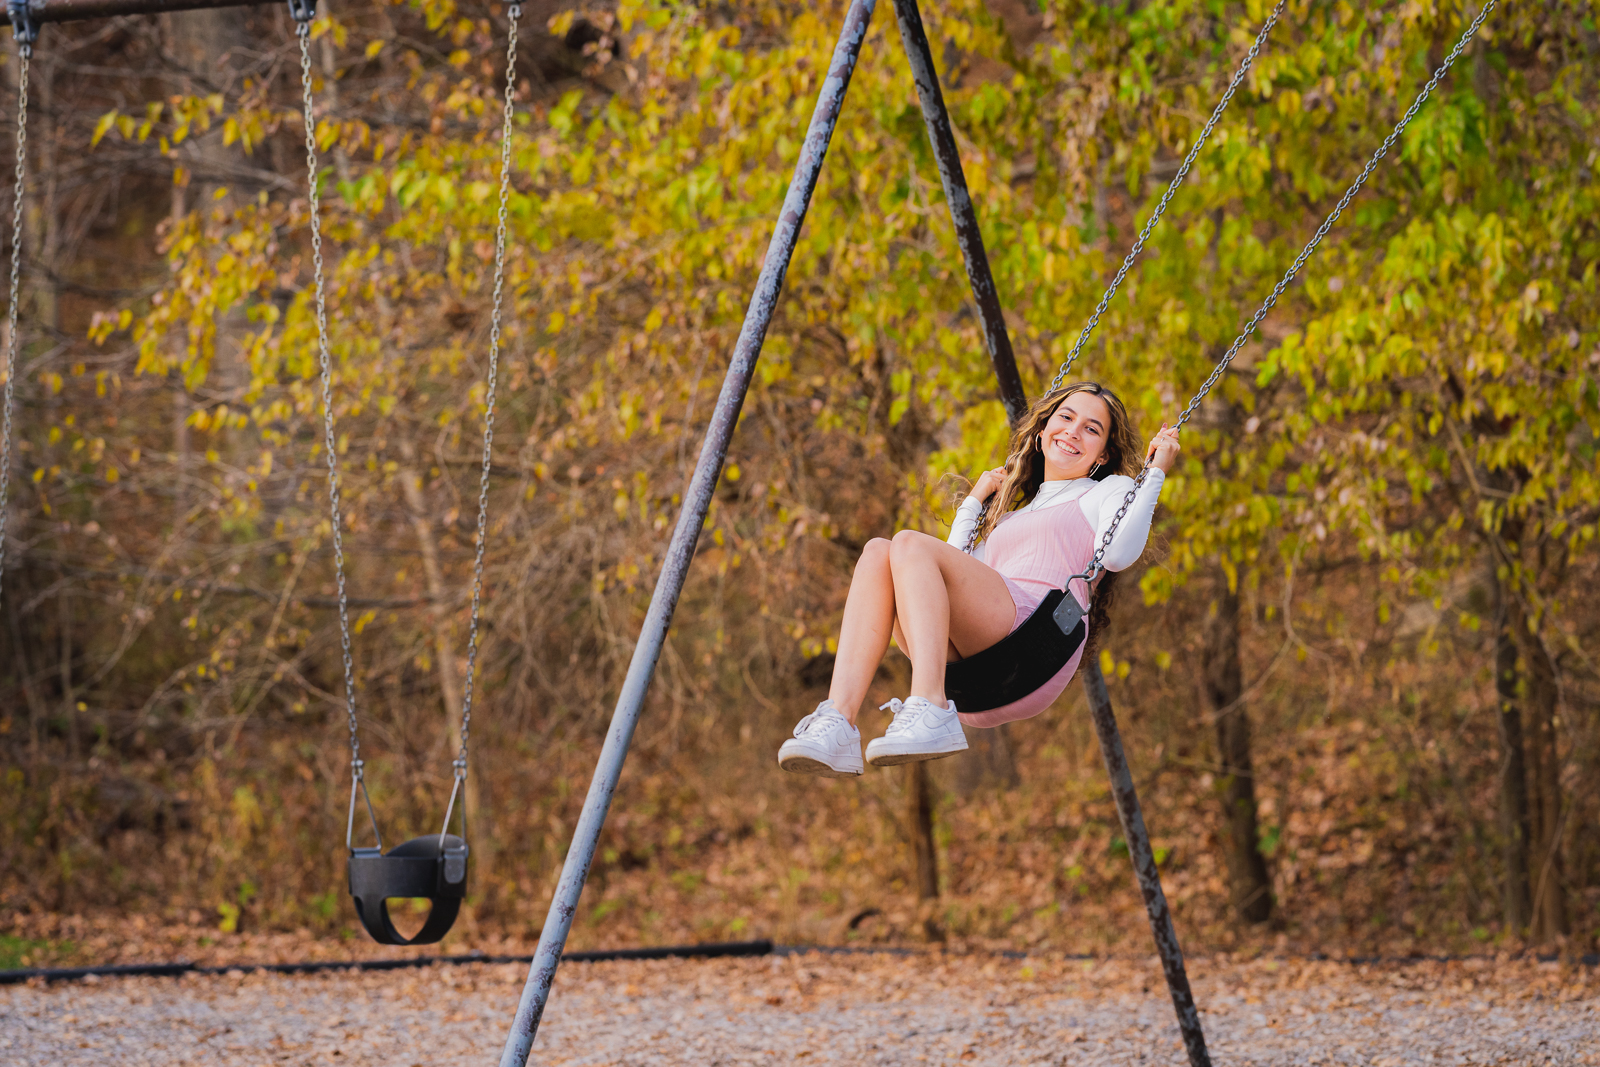 High school girl senior pictures, fall, swing set, outdoor photo session at Tinkers Creek